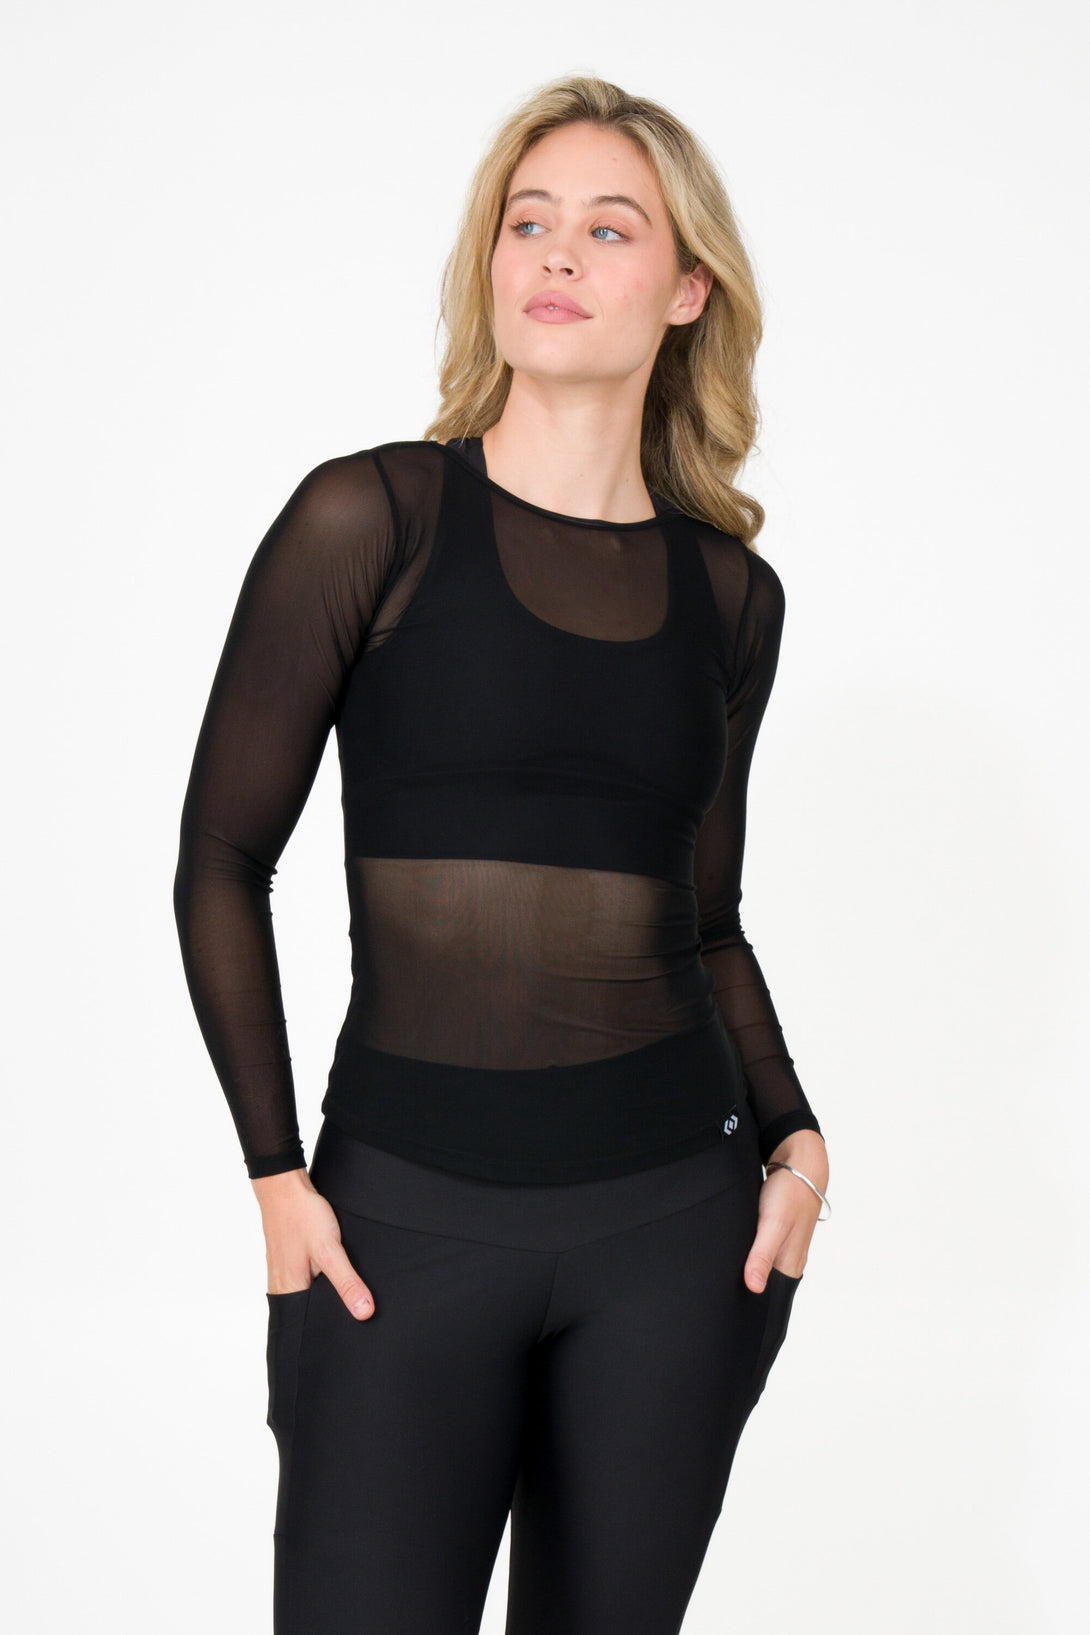 blonde woman wearing black net fitted long sleeve activewear and leisure wear shirt